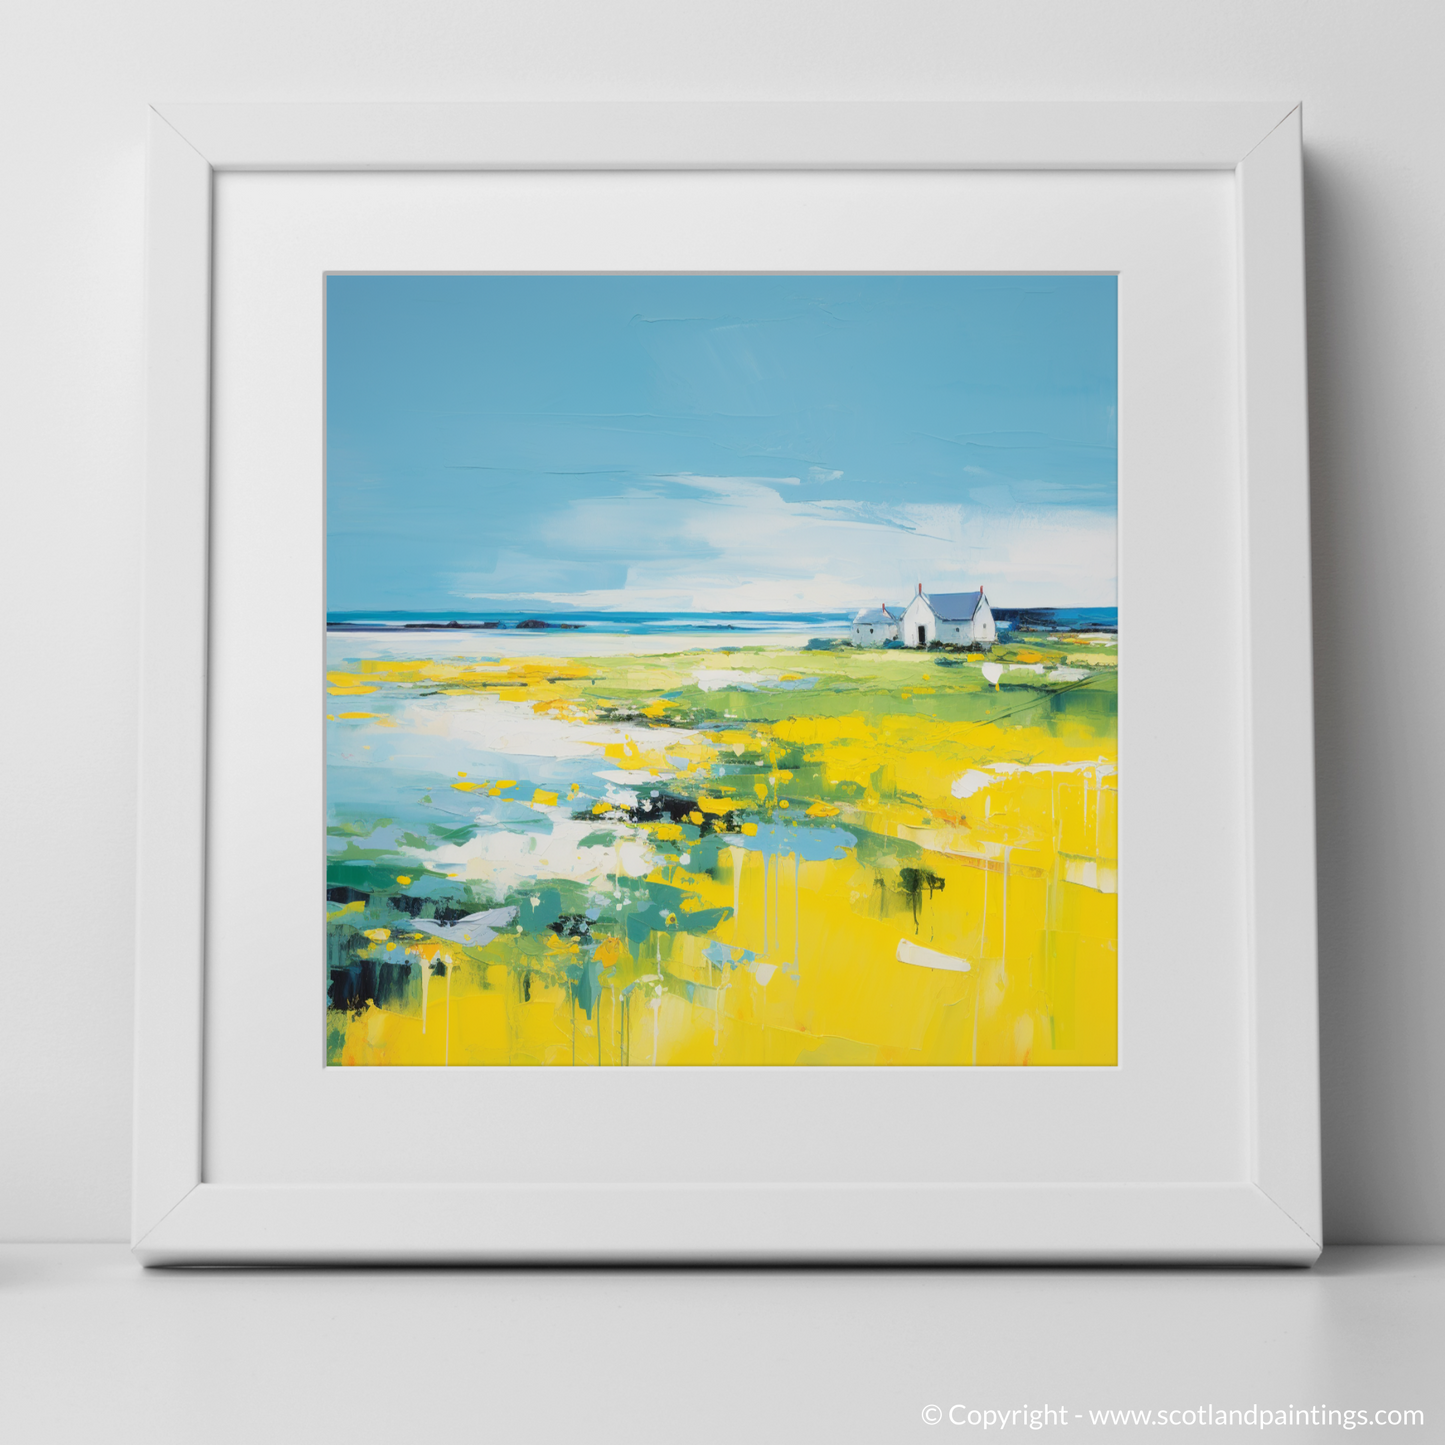 Art Print of Isle of Tiree, Inner Hebrides in summer with a white frame